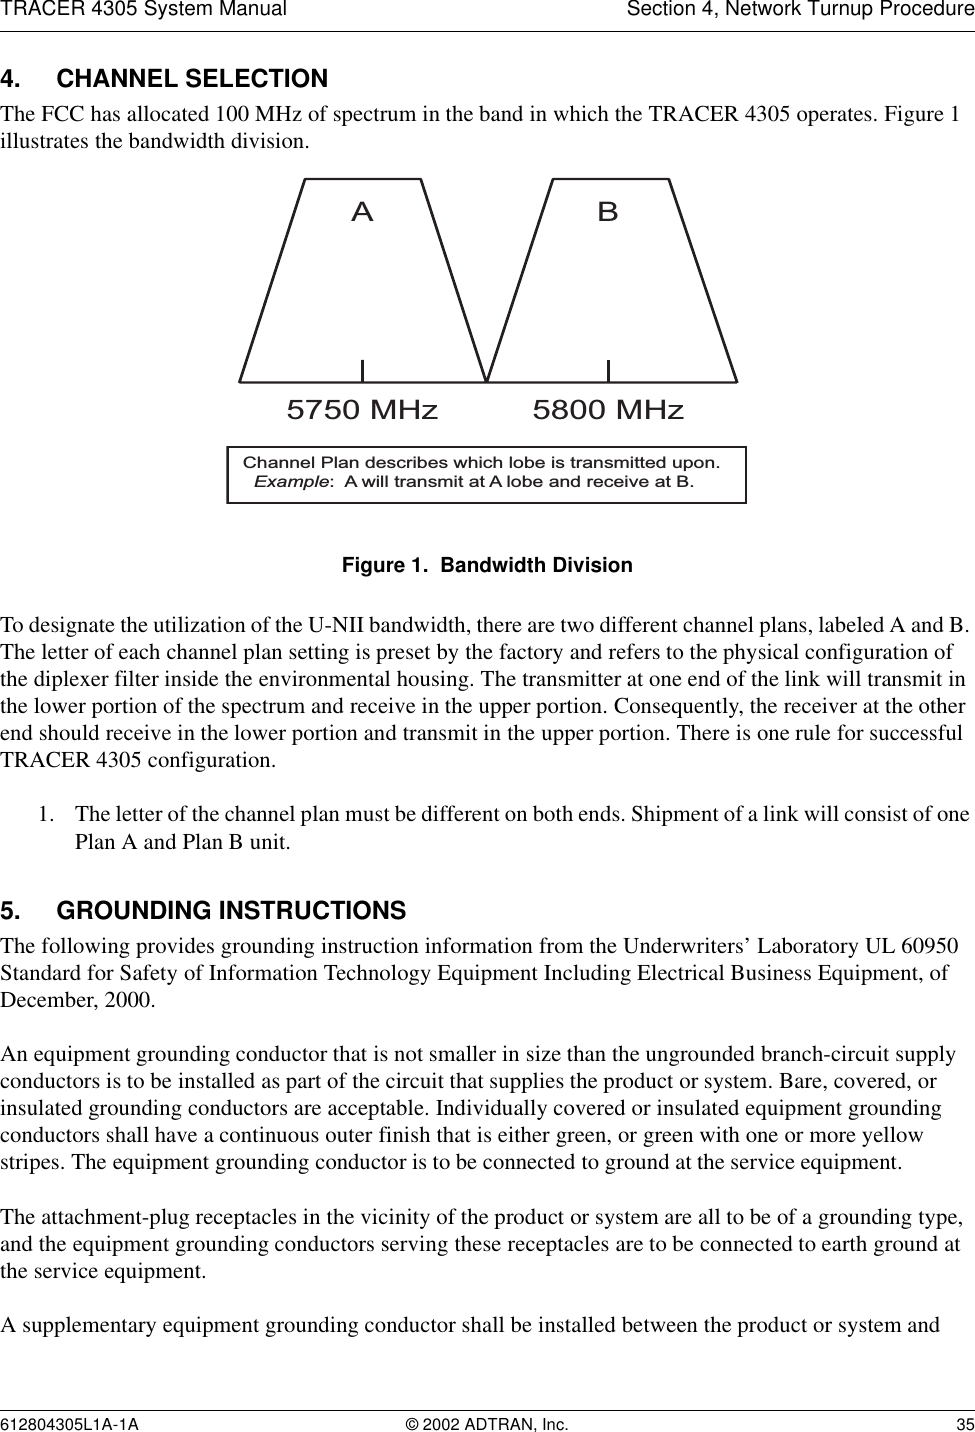 TRACER 4305 System Manual Section 4, Network Turnup Procedure612804305L1A-1A © 2002 ADTRAN, Inc. 354. CHANNEL SELECTIONThe FCC has allocated 100 MHz of spectrum in the band in which the TRACER 4305 operates. Figure 1 illustrates the bandwidth division. Figure 1.  Bandwidth DivisionTo designate the utilization of the U-NII bandwidth, there are two different channel plans, labeled A and B. The letter of each channel plan setting is preset by the factory and refers to the physical configuration of the diplexer filter inside the environmental housing. The transmitter at one end of the link will transmit in the lower portion of the spectrum and receive in the upper portion. Consequently, the receiver at the other end should receive in the lower portion and transmit in the upper portion. There is one rule for successful TRACER 4305 configuration.1. The letter of the channel plan must be different on both ends. Shipment of a link will consist of one Plan A and Plan B unit.5. GROUNDING INSTRUCTIONSThe following provides grounding instruction information from the Underwriters’ Laboratory UL 60950 Standard for Safety of Information Technology Equipment Including Electrical Business Equipment, of December, 2000.An equipment grounding conductor that is not smaller in size than the ungrounded branch-circuit supply conductors is to be installed as part of the circuit that supplies the product or system. Bare, covered, or insulated grounding conductors are acceptable. Individually covered or insulated equipment grounding conductors shall have a continuous outer finish that is either green, or green with one or more yellow stripes. The equipment grounding conductor is to be connected to ground at the service equipment.The attachment-plug receptacles in the vicinity of the product or system are all to be of a grounding type, and the equipment grounding conductors serving these receptacles are to be connected to earth ground at the service equipment.A supplementary equipment grounding conductor shall be installed between the product or system and A5750 MHzB5800 MHzChannel Plan describes which lobe is transmitted upon.  Example:  A will transmit at A lobe and receive at B.